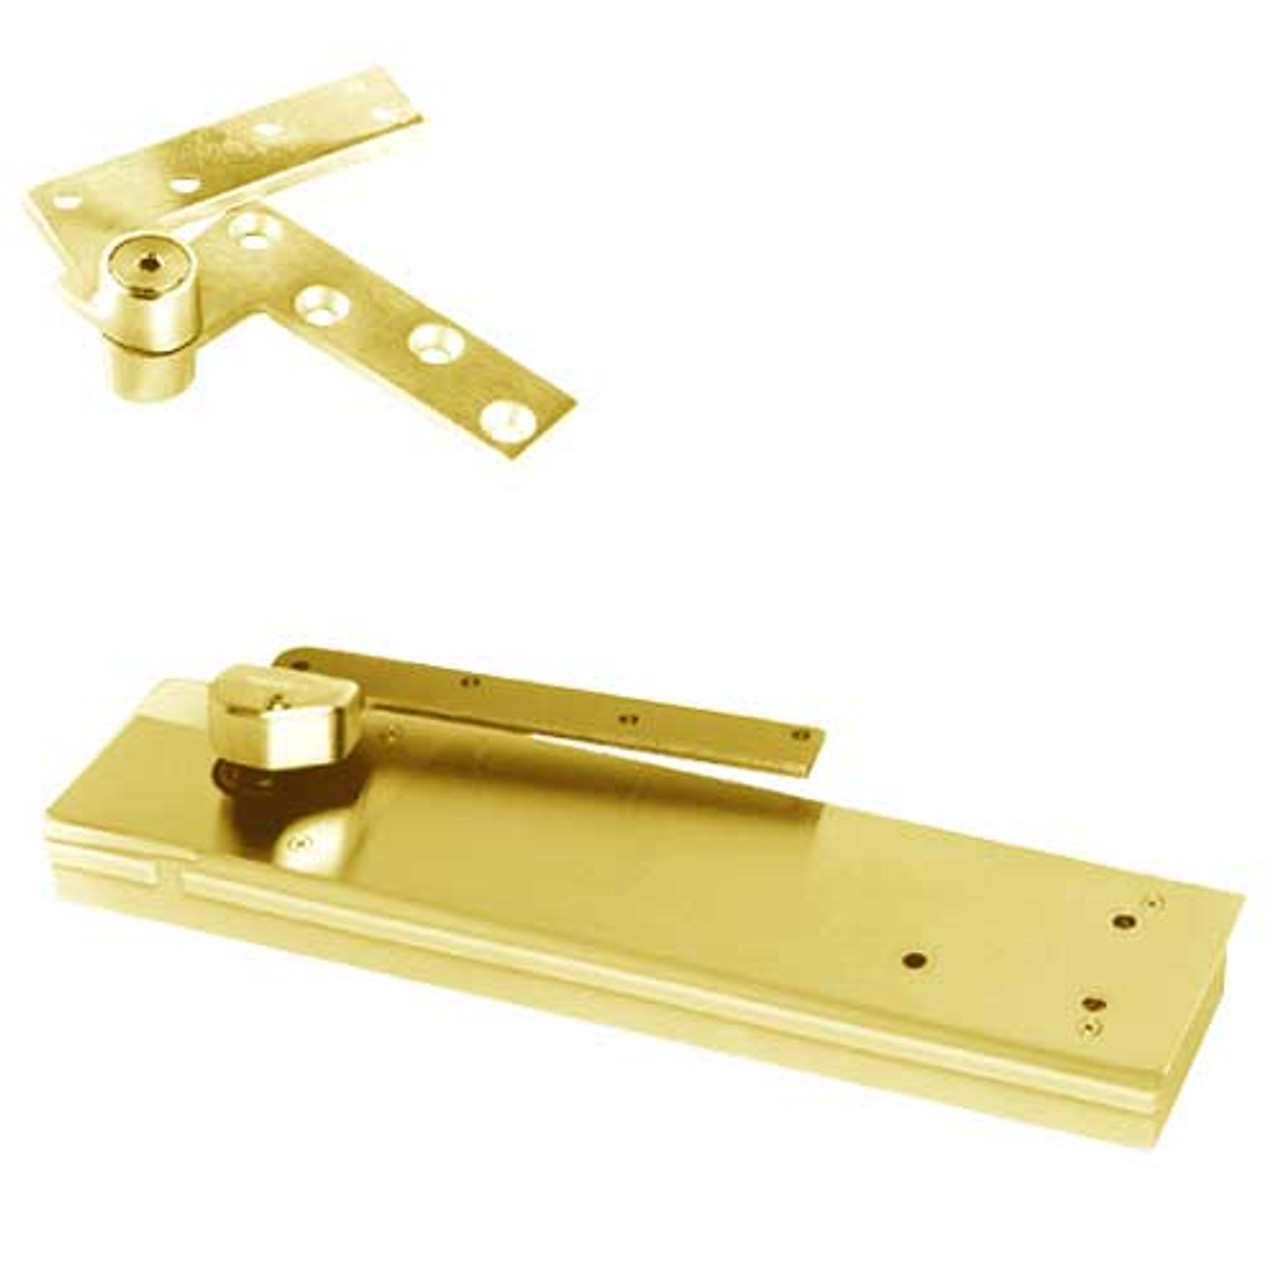 5103ABC180-1-1/2OS-LFP-LTP-LH-605 Rixson 51 Series 1-1/2" Offset Hung Shallow Depth Floor Closers in Bright Brass Finish